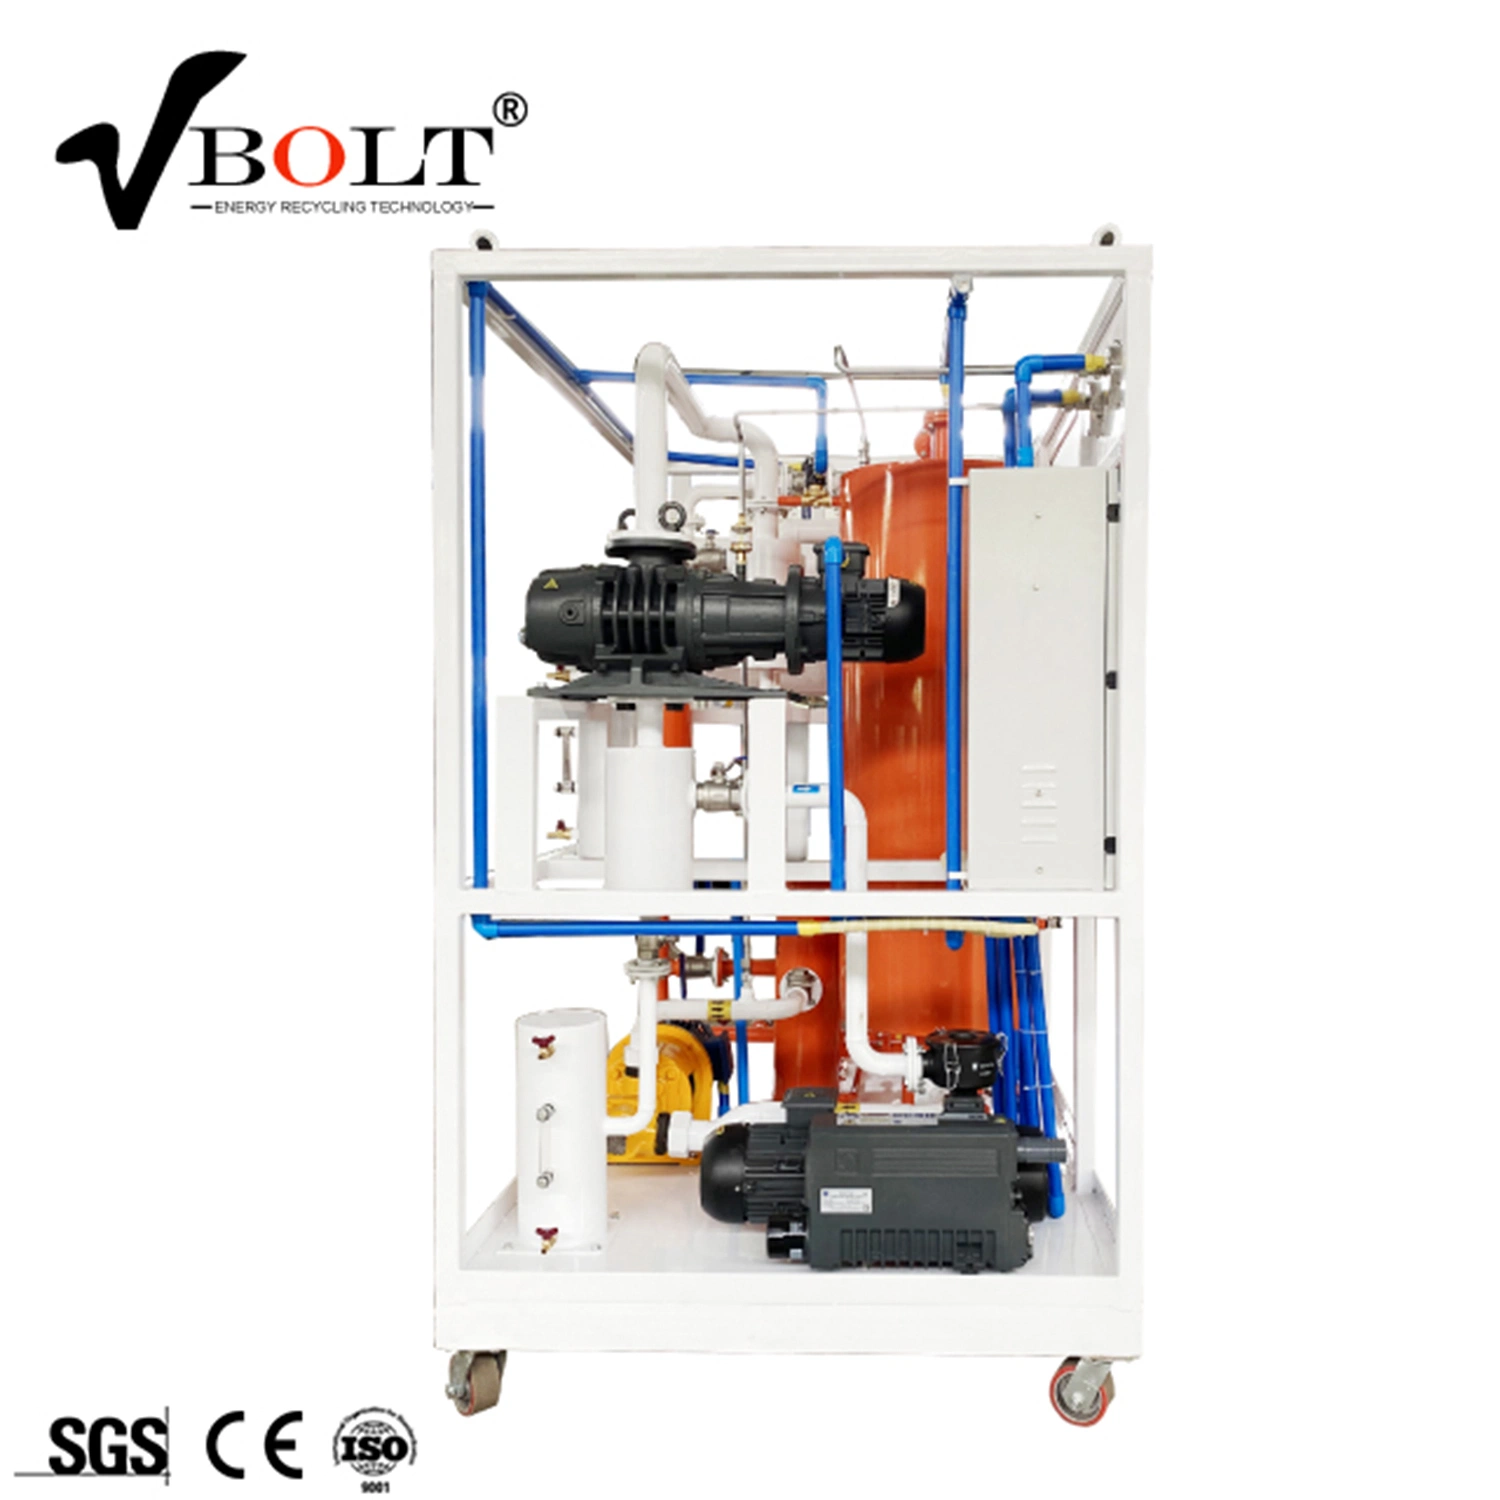 Refrigeration Lube Oil Gear Oil Dehydration and Impurities Filtering Treatment Equipment